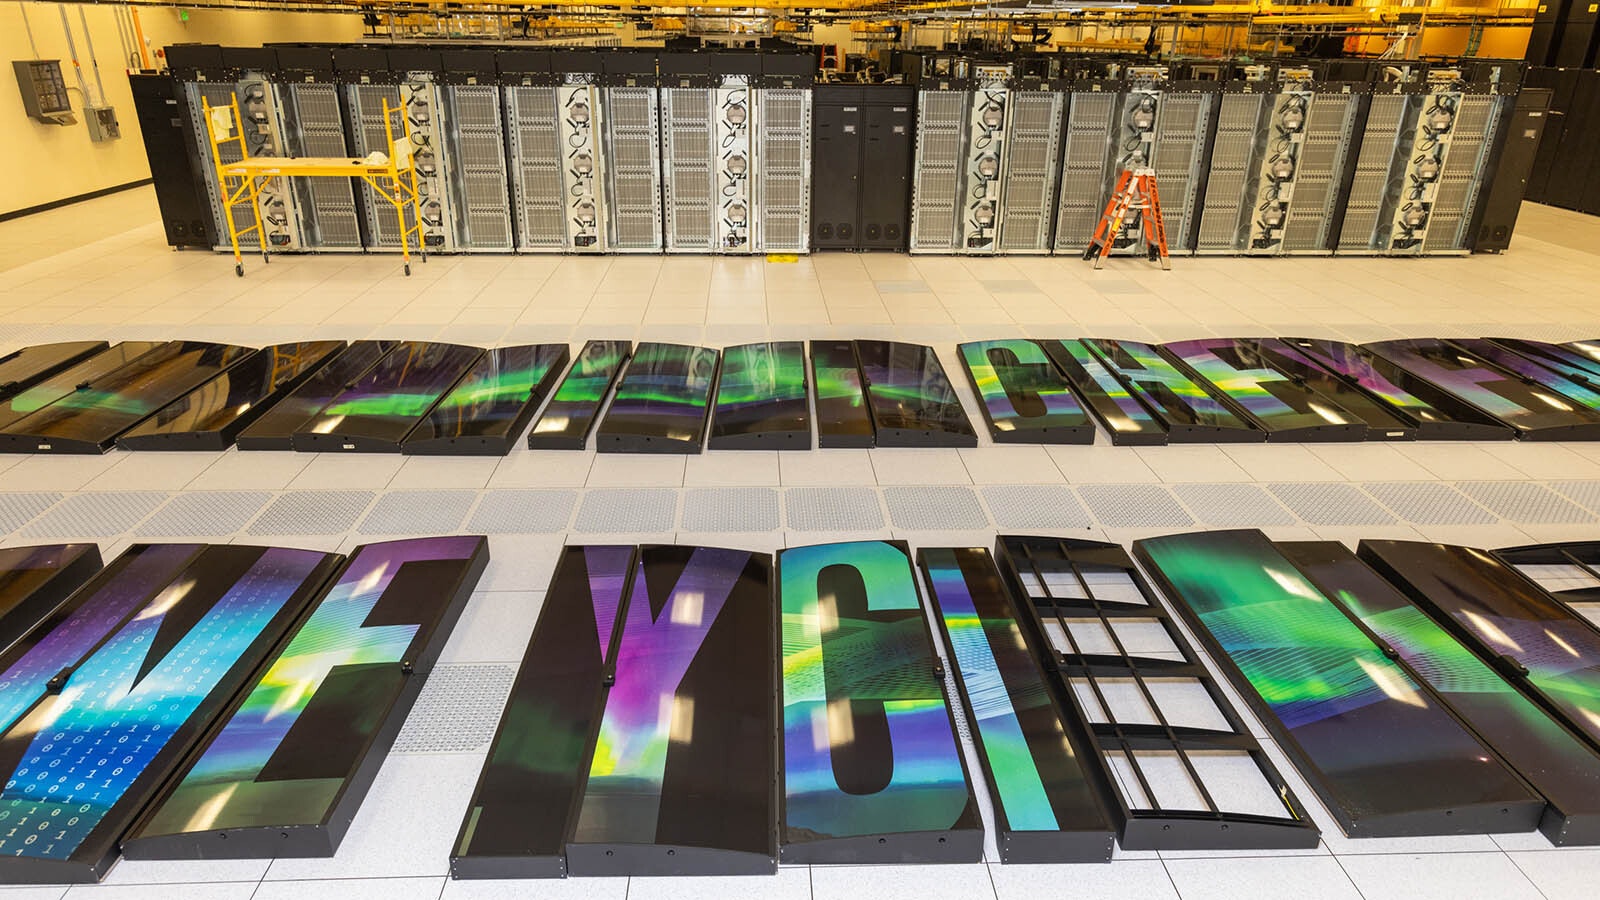 The Cheyenne supercomputer was in service for seven year, but is now being dismantled to move after it sold at auction to a mystery buyer for $480,000. The set-up still packs a punch with speeds at 5.34 teraflopw, or about 5.3 quadrillion calculations per second.